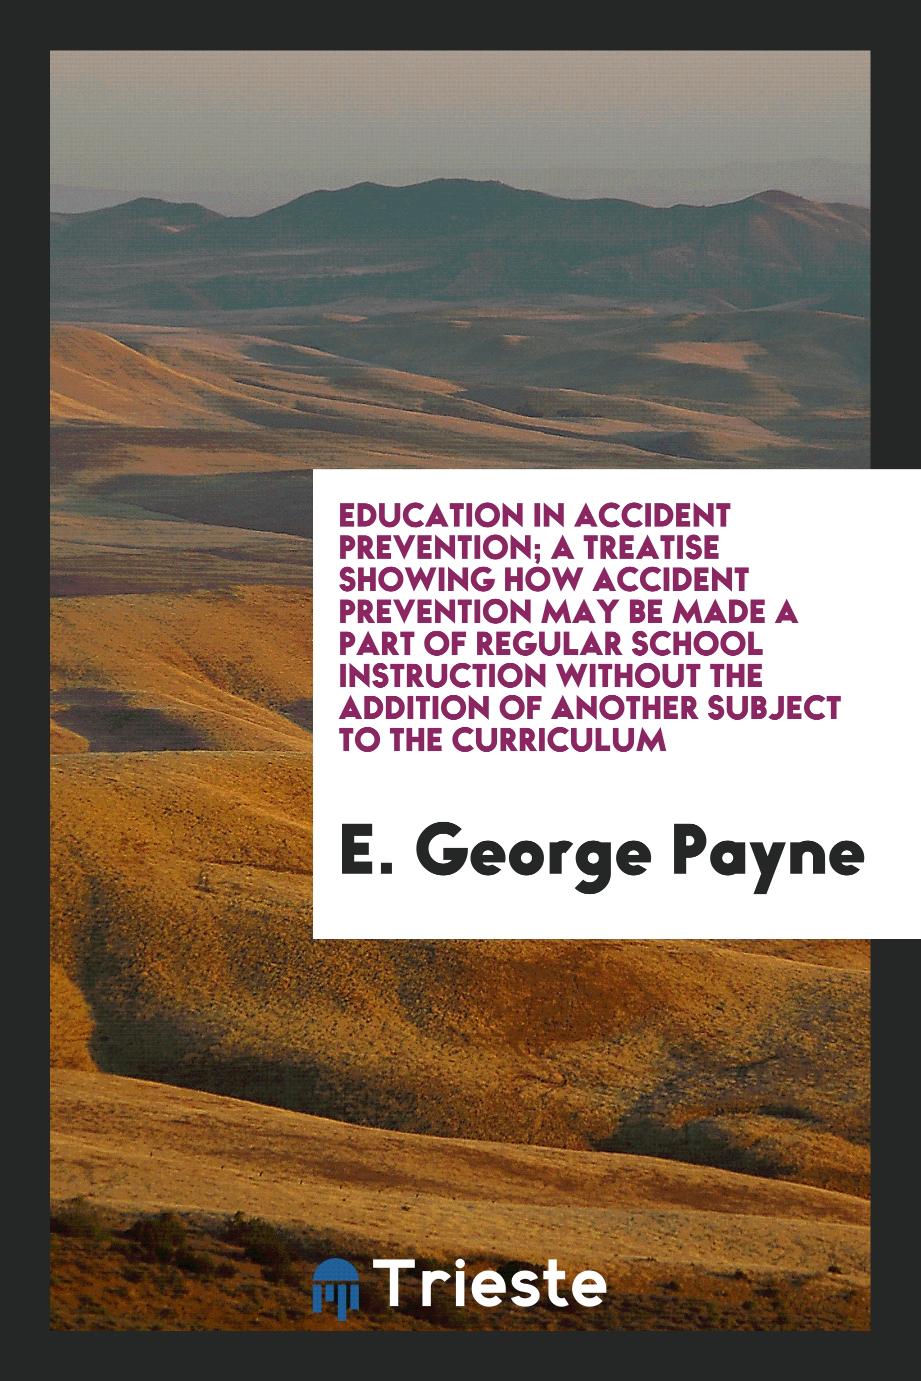 E. George Payne - Education in Accident Prevention; A Treatise Showing How Accident Prevention May Be Made a Part of Regular School Instruction without the Addition of Another Subject to the Curriculum